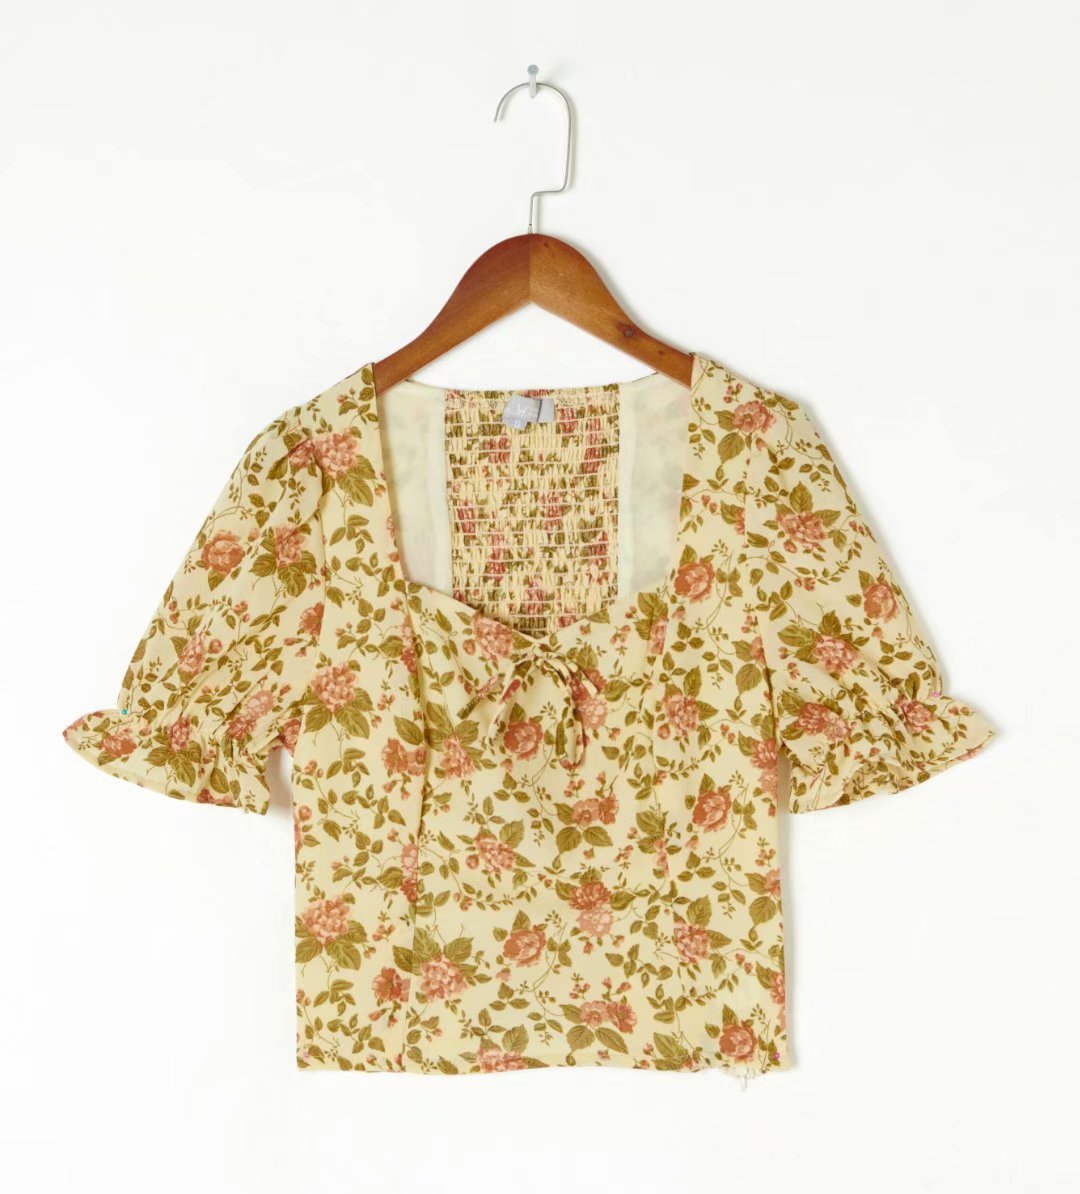 Summer Trendy Slim Shirt Square Collar Shirt French Vintage Small Floral Puff Sleeve Top Women